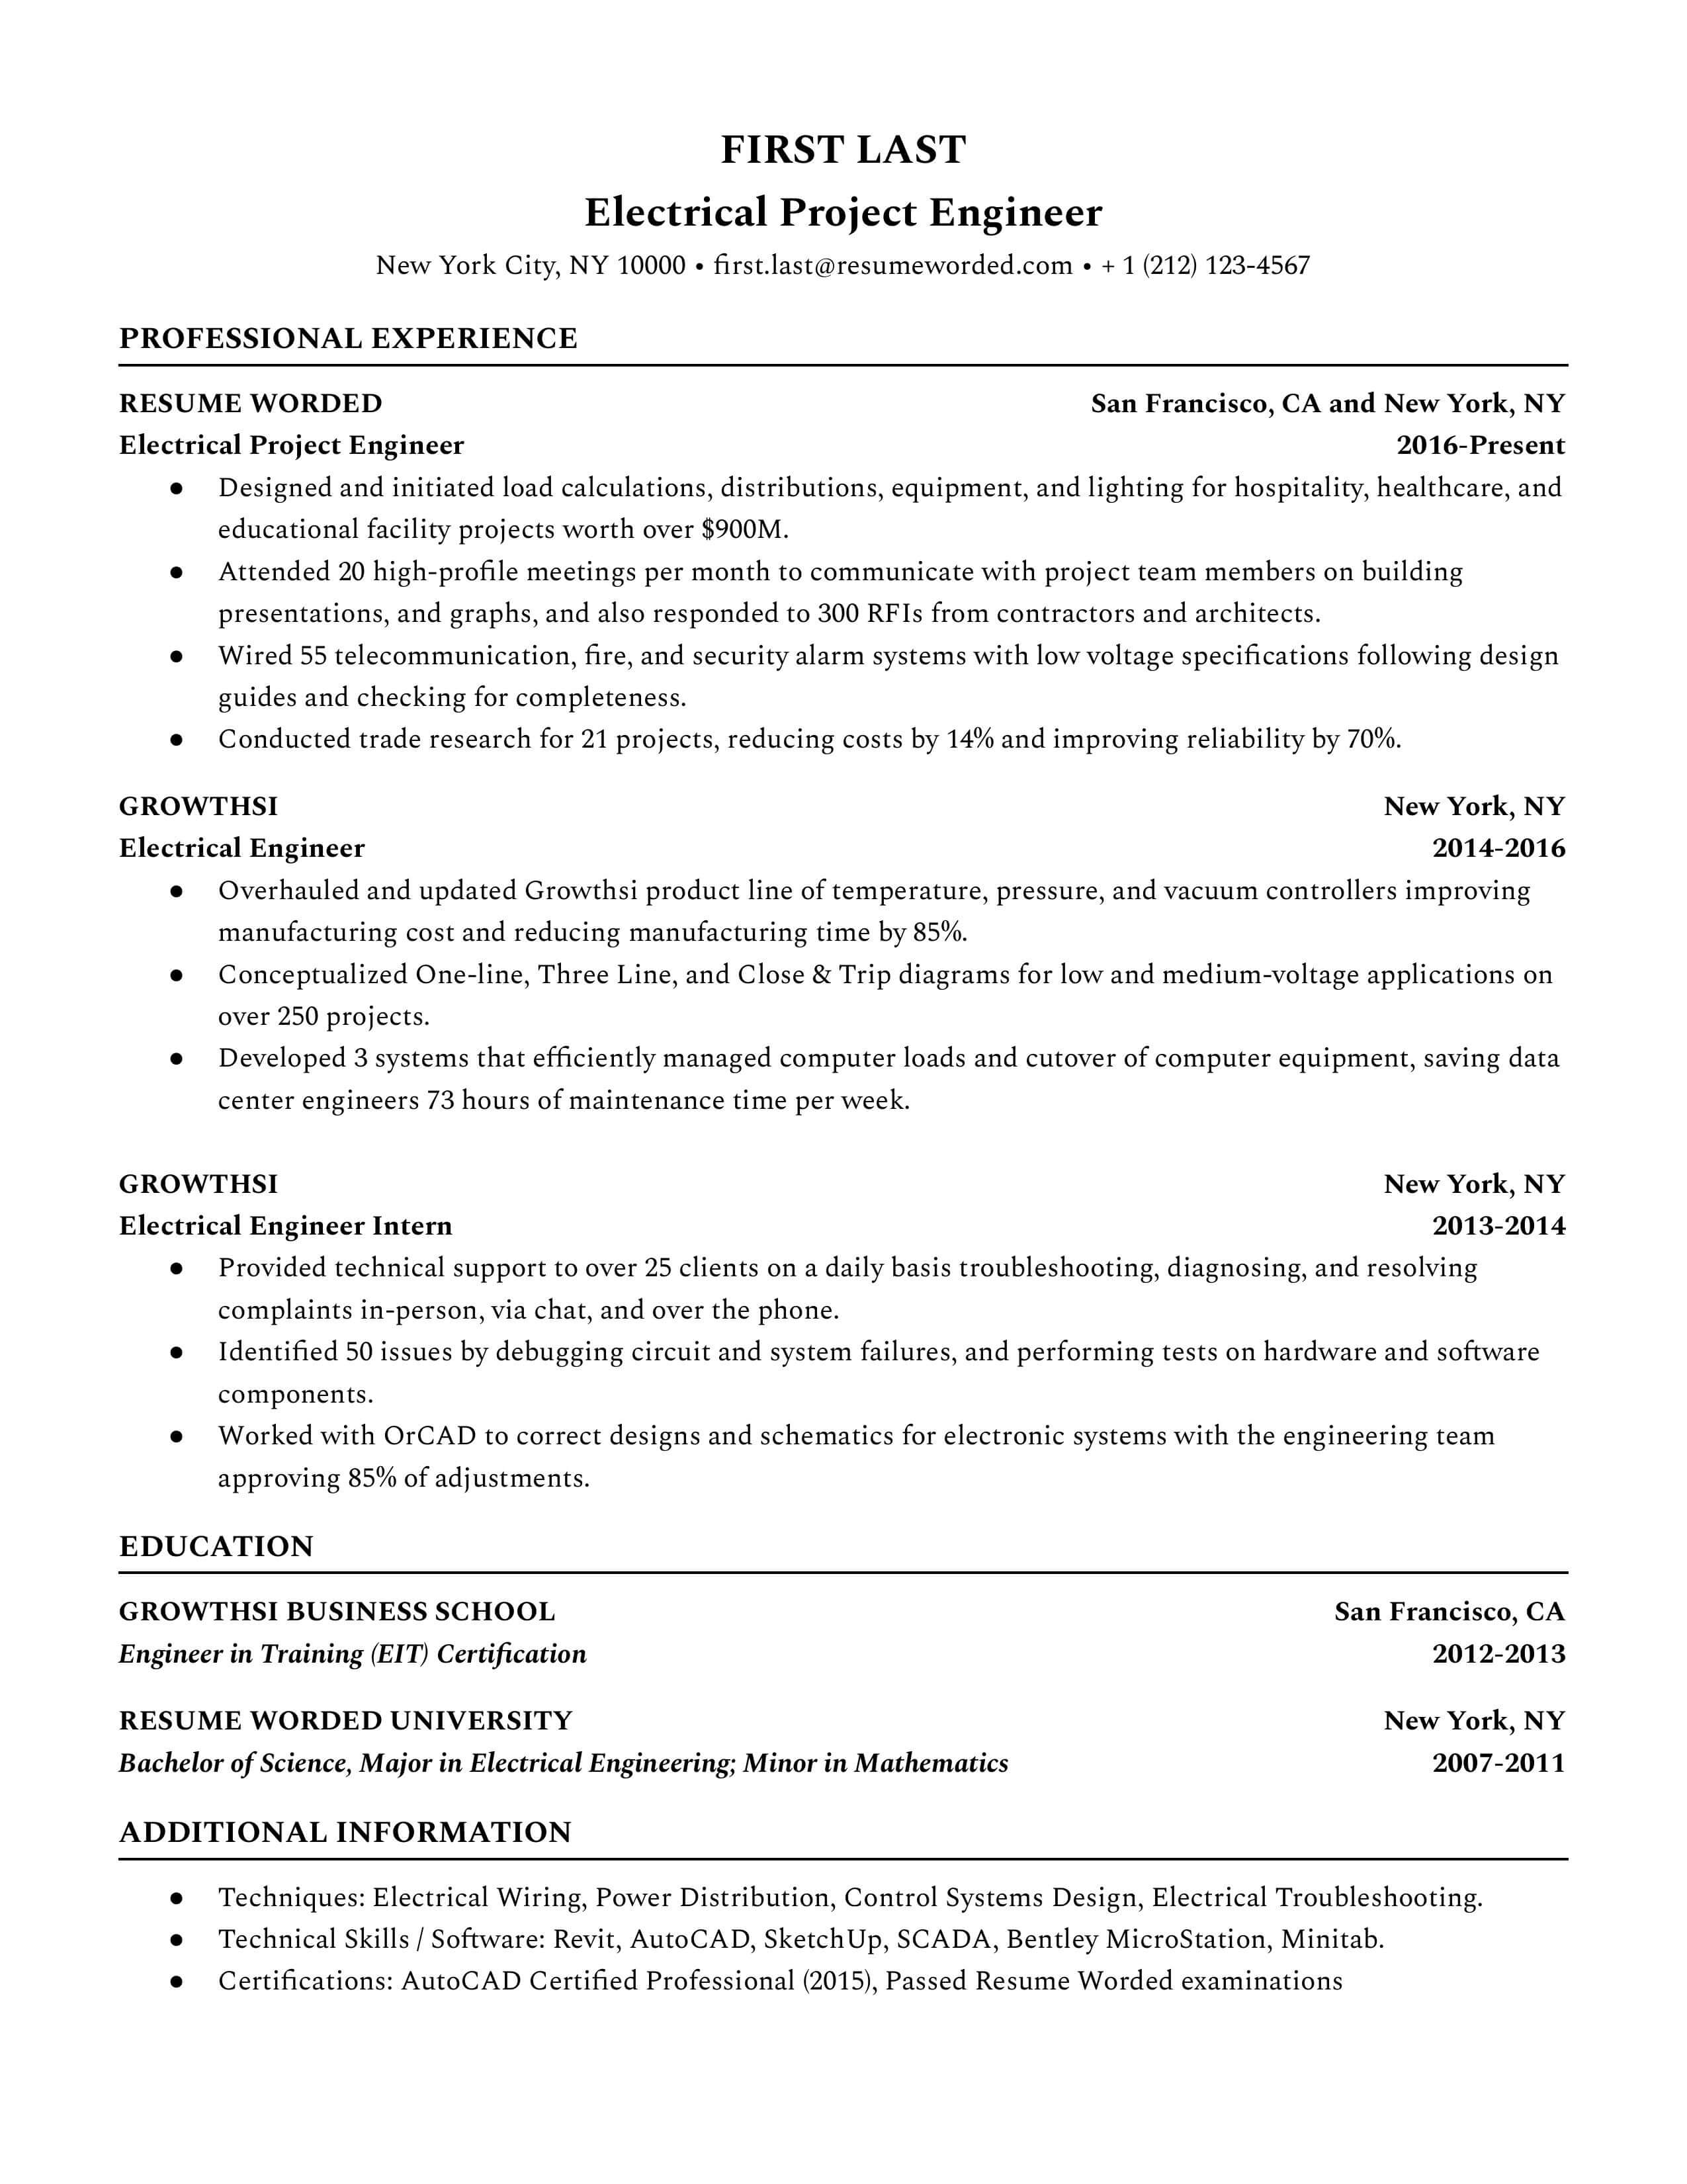 Electrical Project Engineer resume template